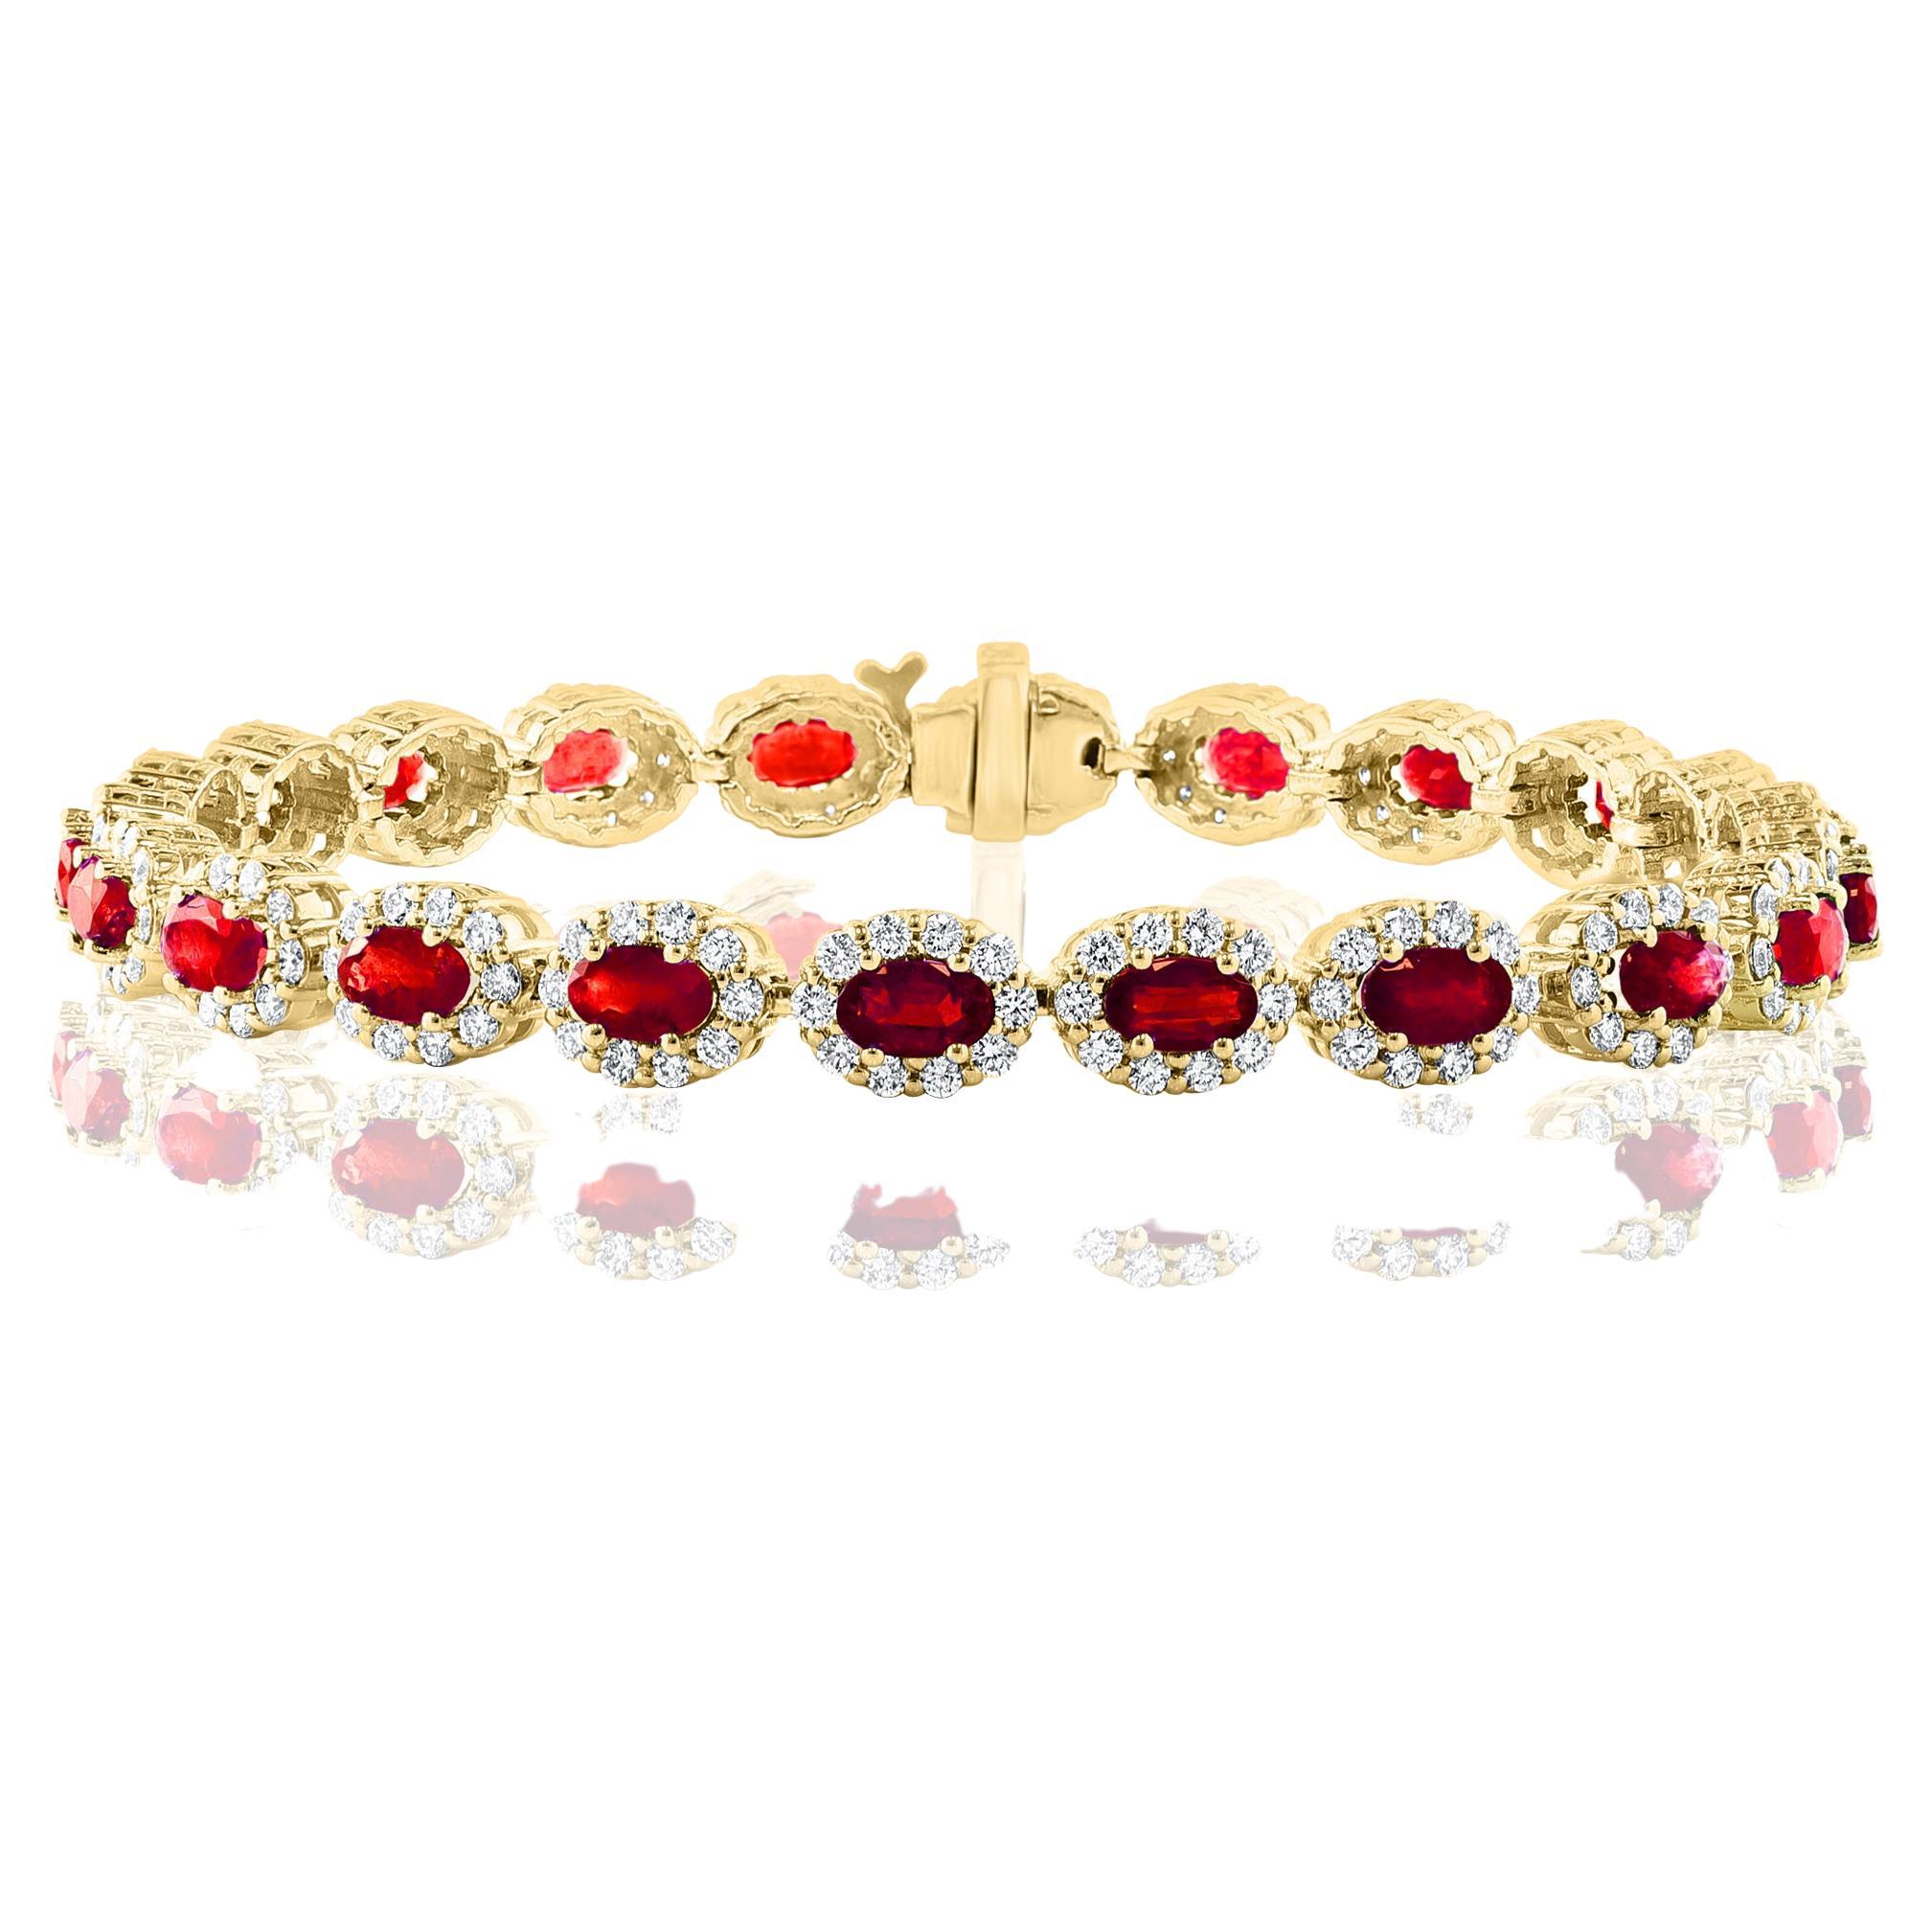 6.43 Carat Oval Cut Ruby and Diamond Halo Bracelet in 14K Yellow Gold For Sale